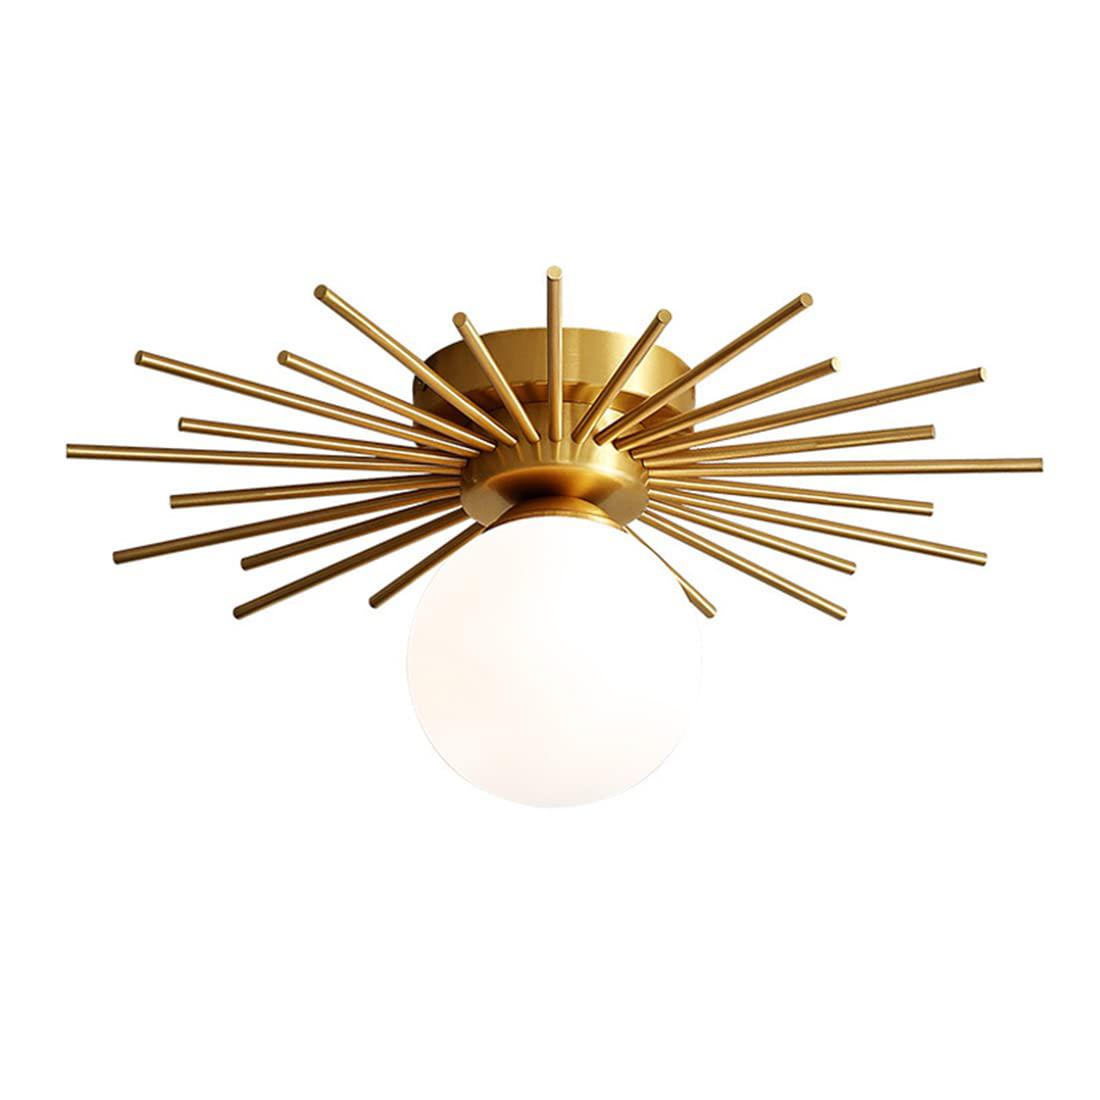 pobllem glass flush mount ceiling light gold mid century modern ceiling lamp with white glass orb shade, brass close to ceili